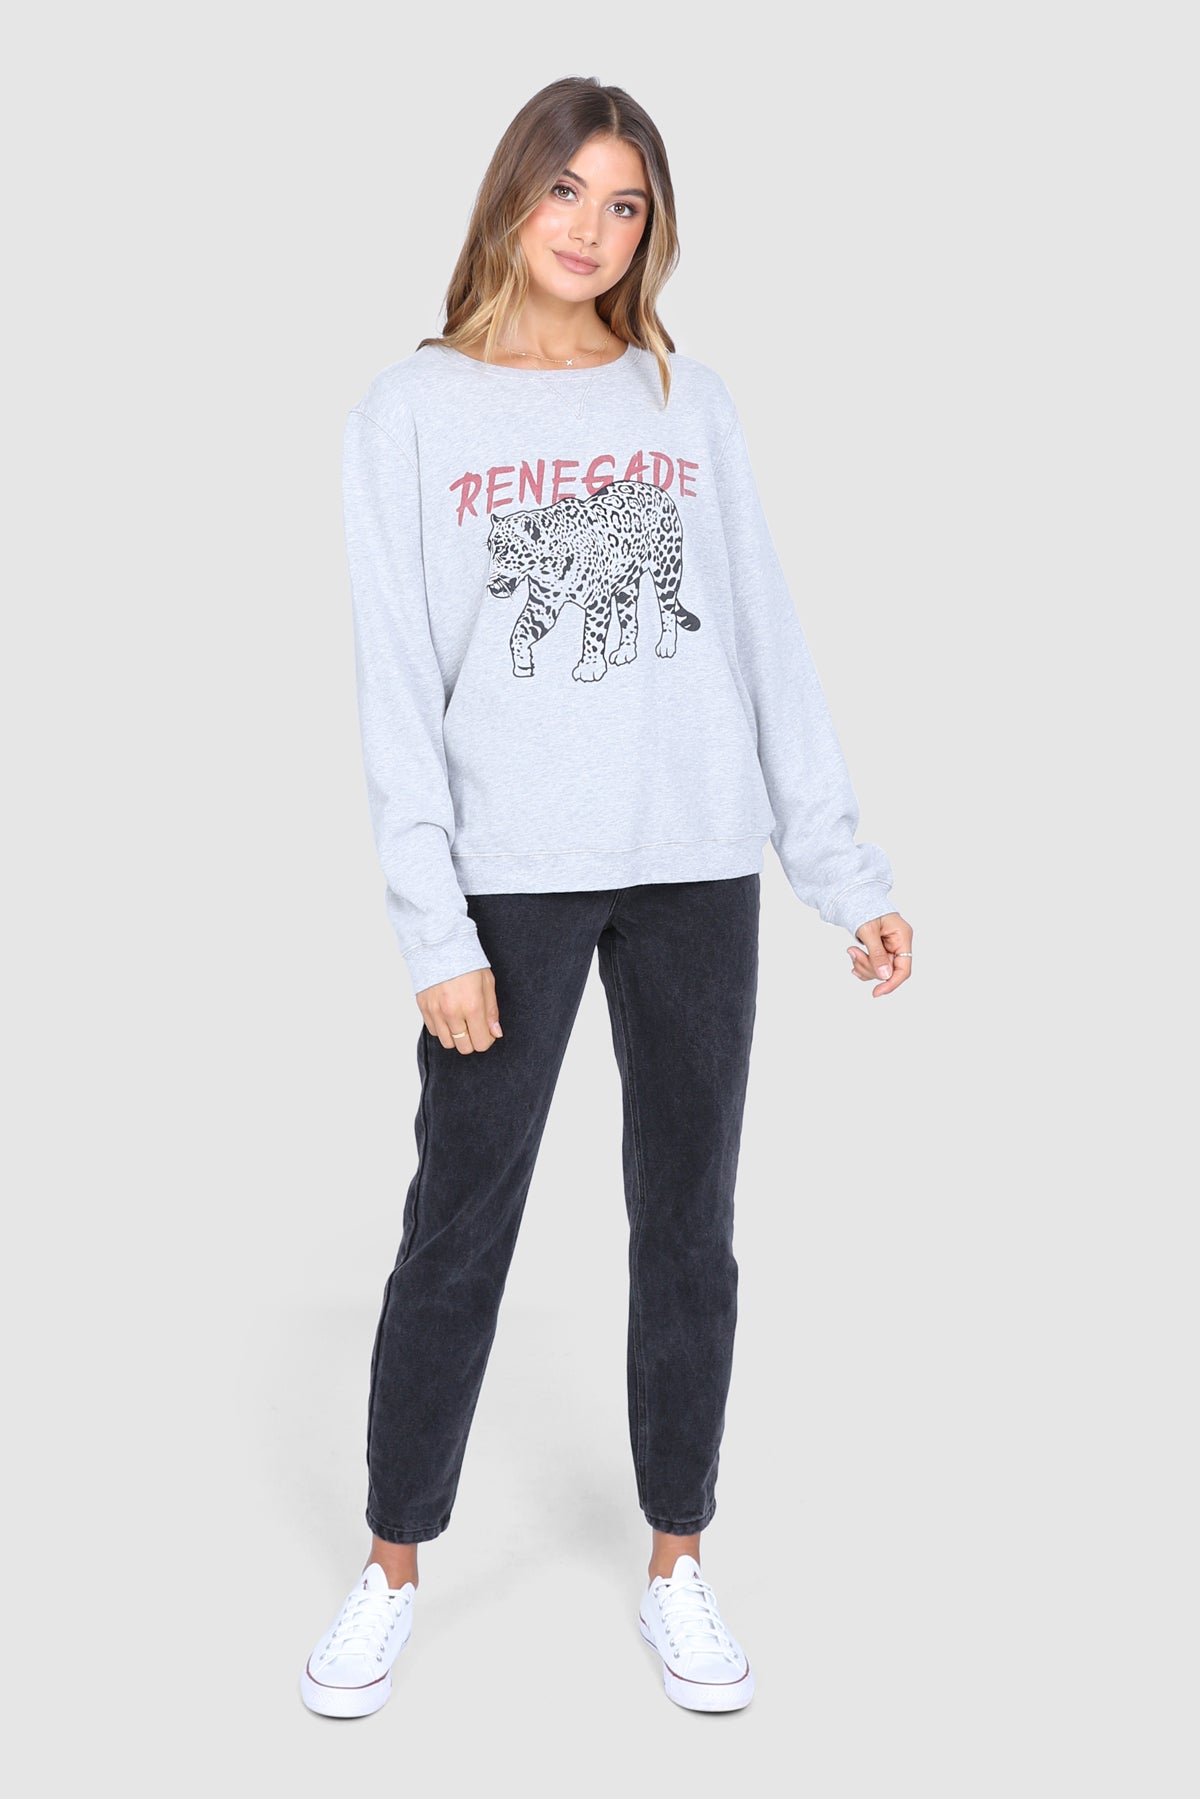 Bailage Haired Caucasian Female wearing a Relaxed Fit  Basic  Casual  Scoop Neck  Leopard Print  Crew neck Jumper  Graphic Designed Sweater  Cuffed Long Sleeves paired with high waisted black denim jeans and white converse